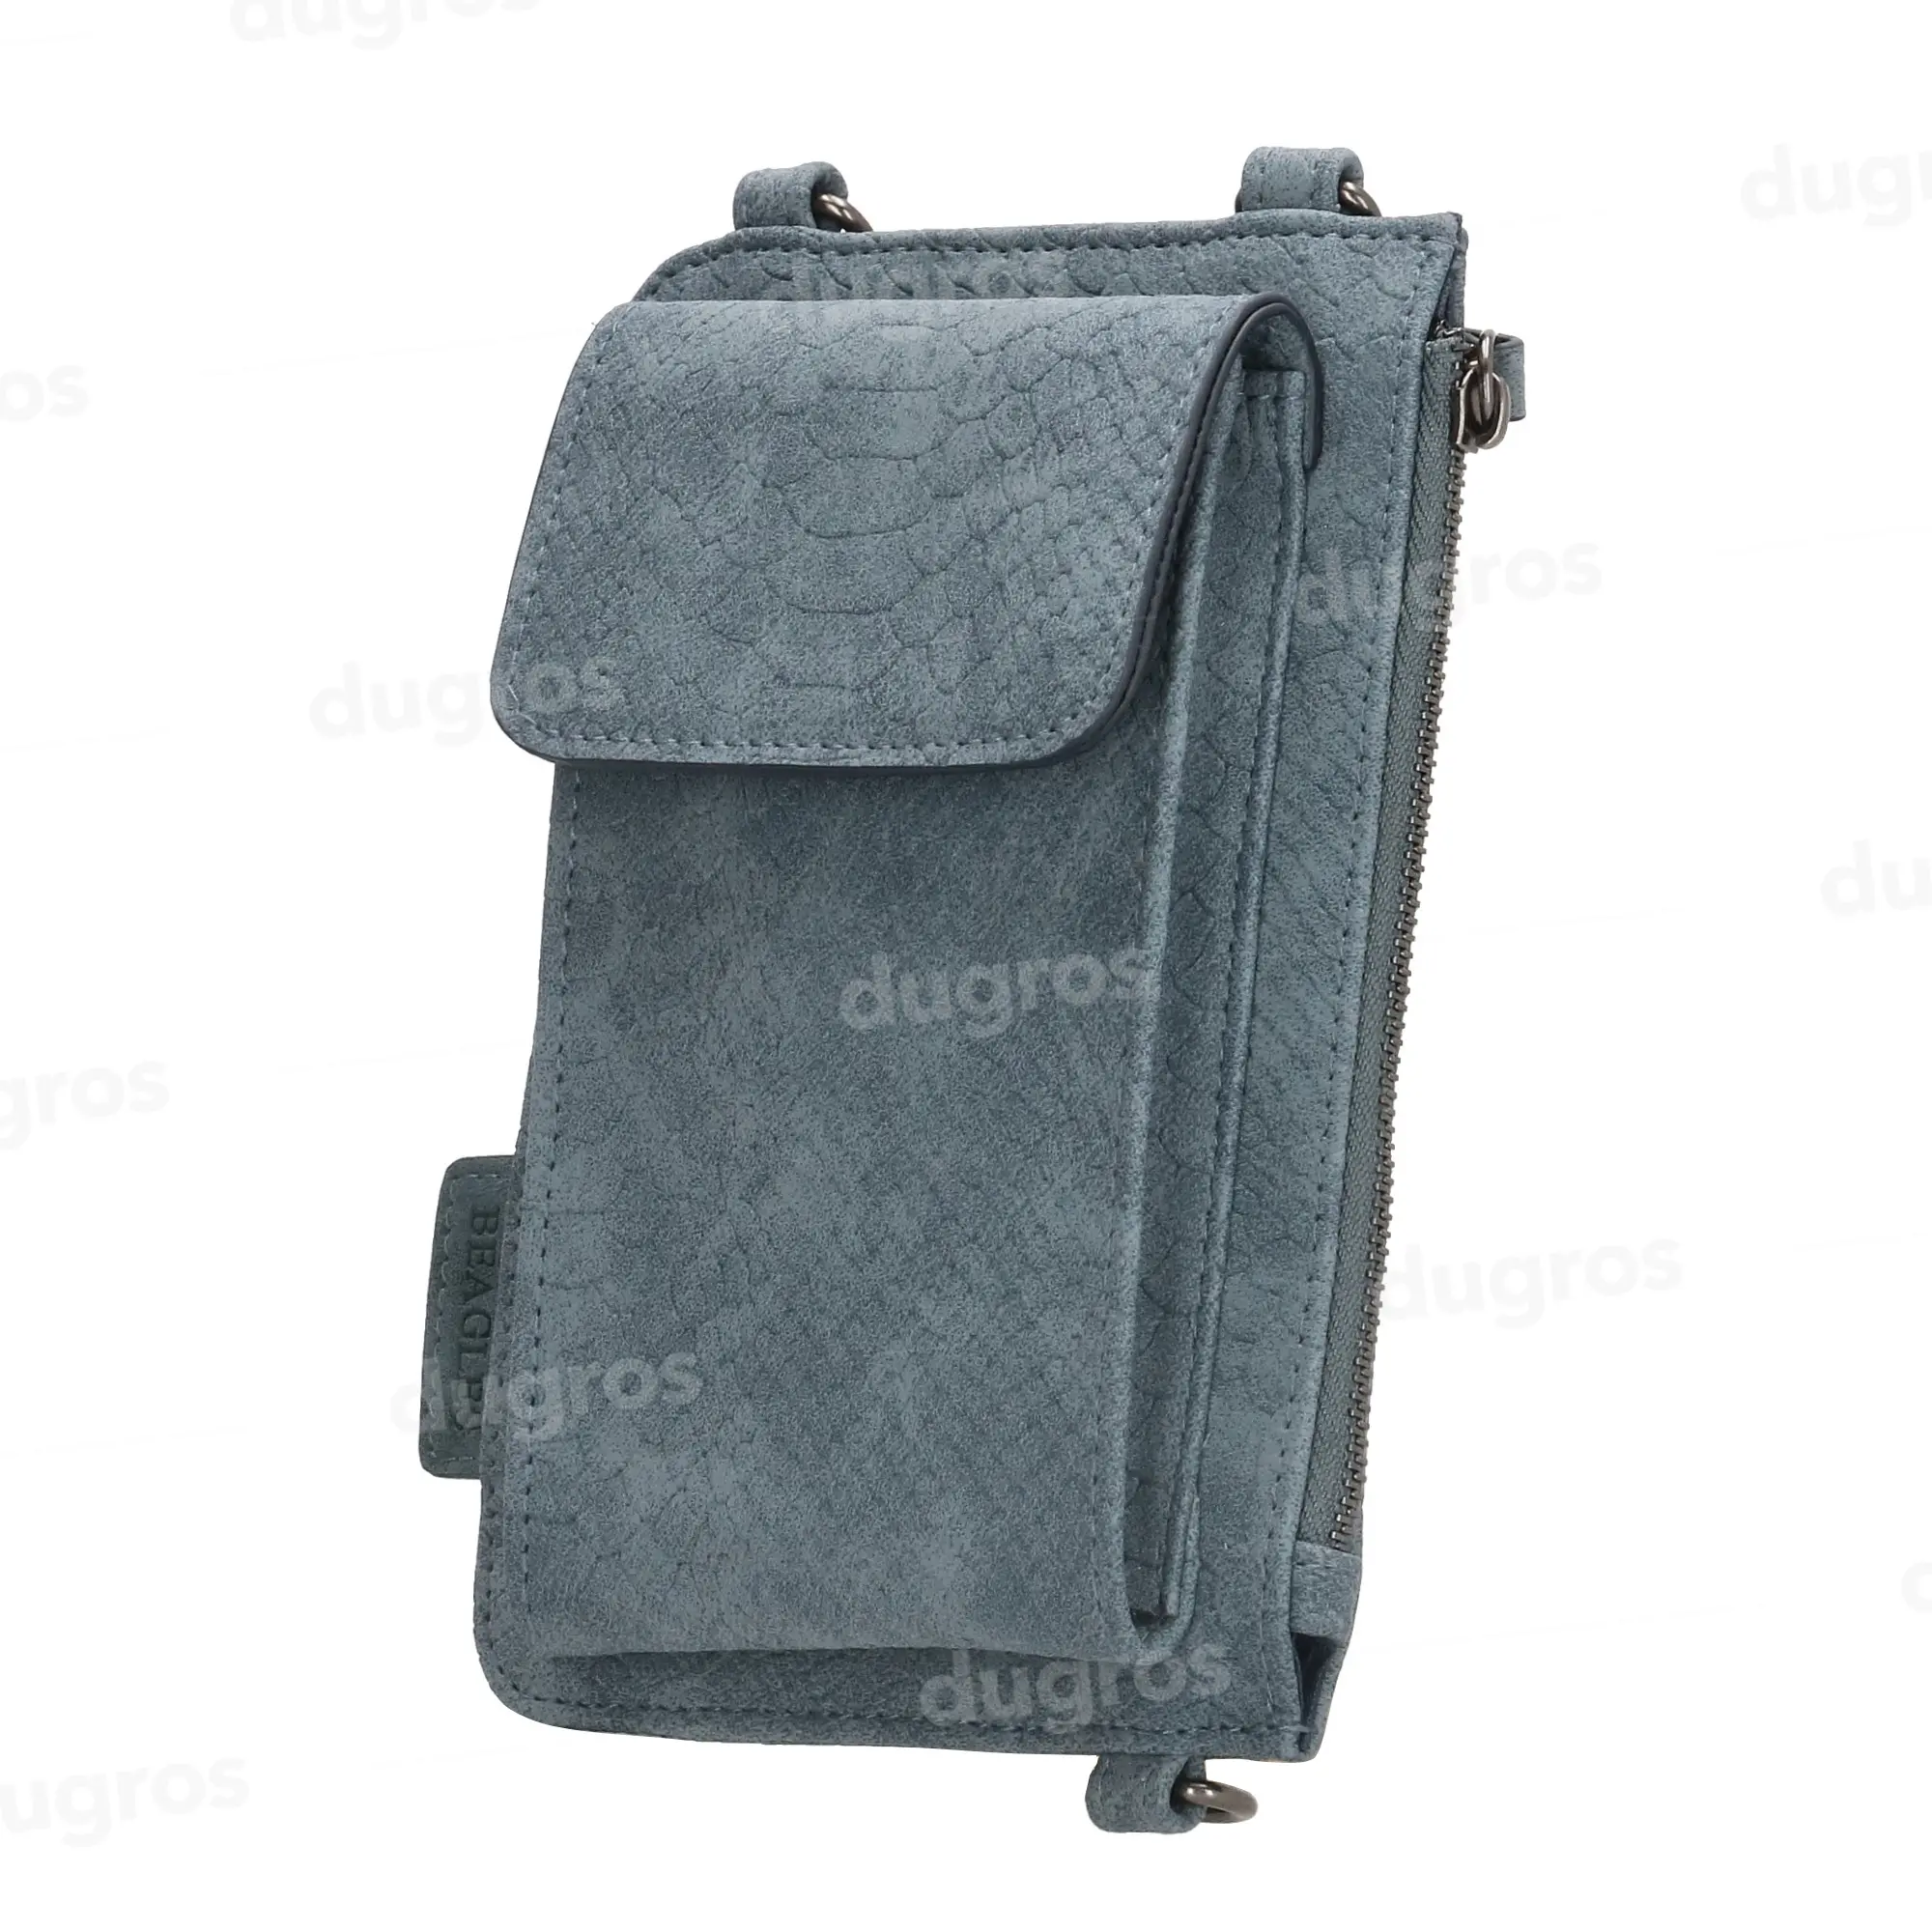 High quality artificial leather snake print phone bag with detachable/adjustable shoulder strap